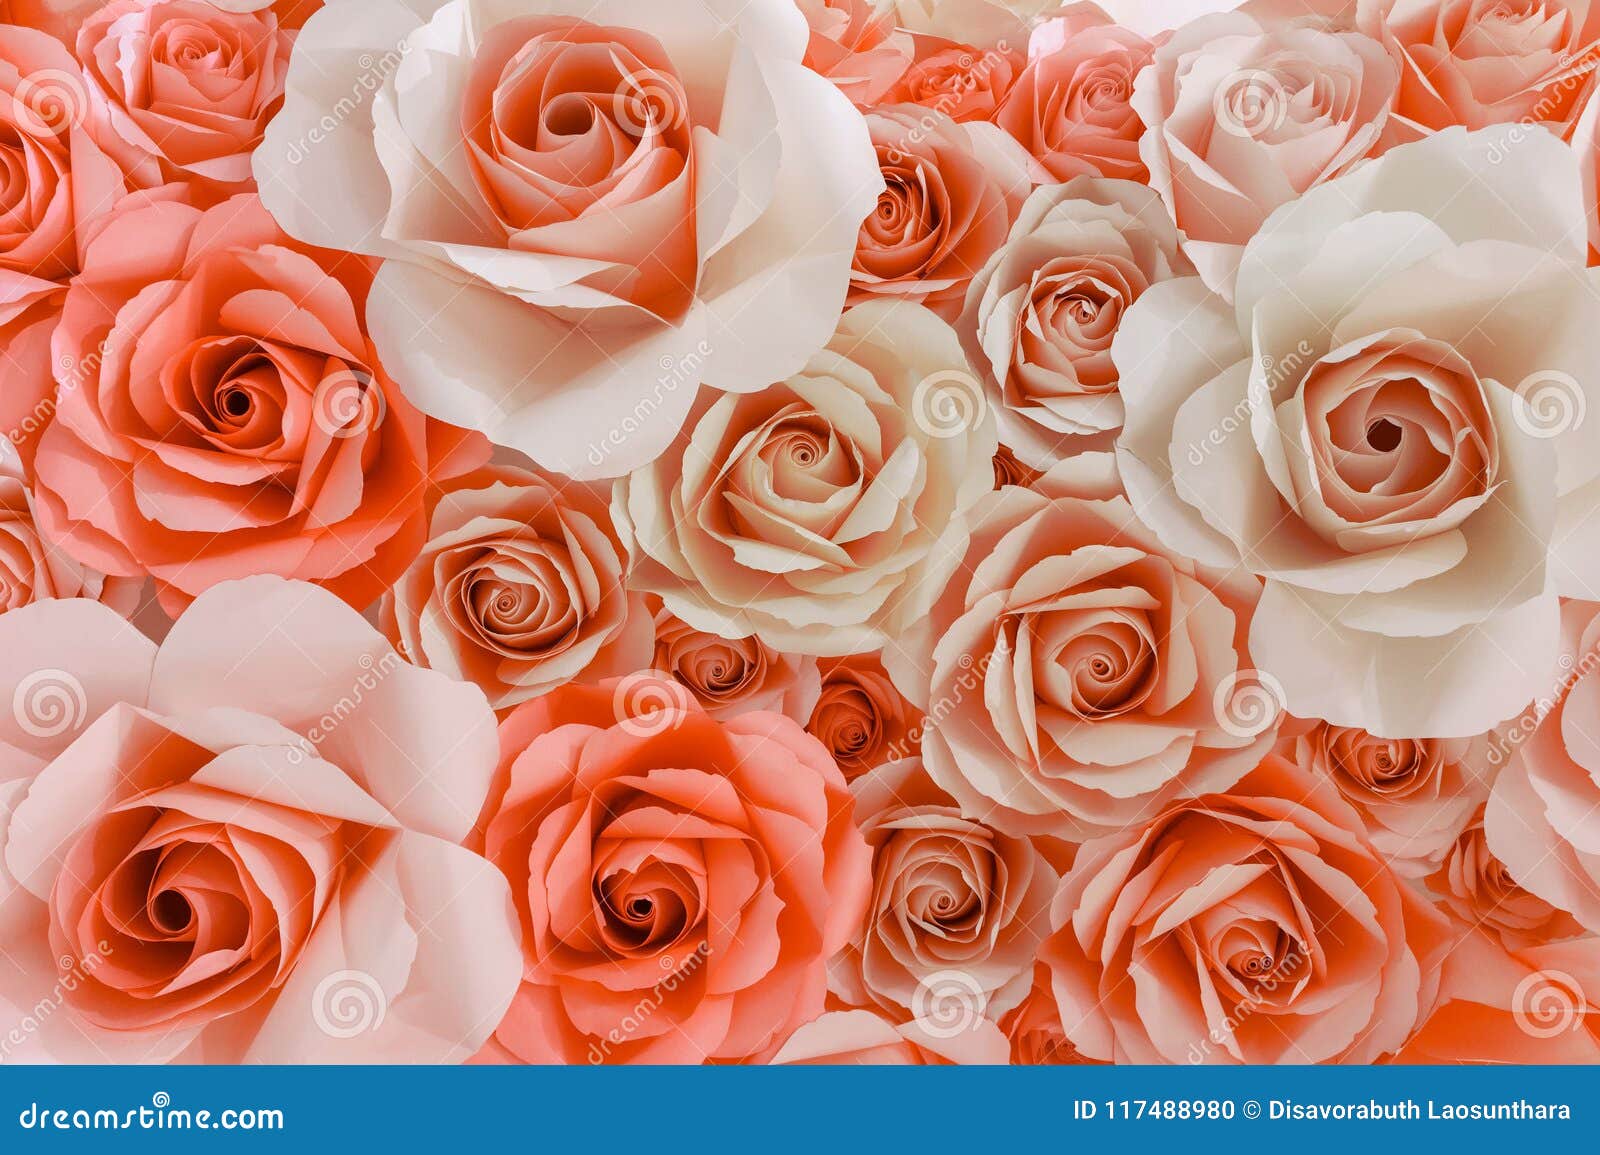 Colorful Rose Paper Flowers are Texture Background Stock Photo - Image